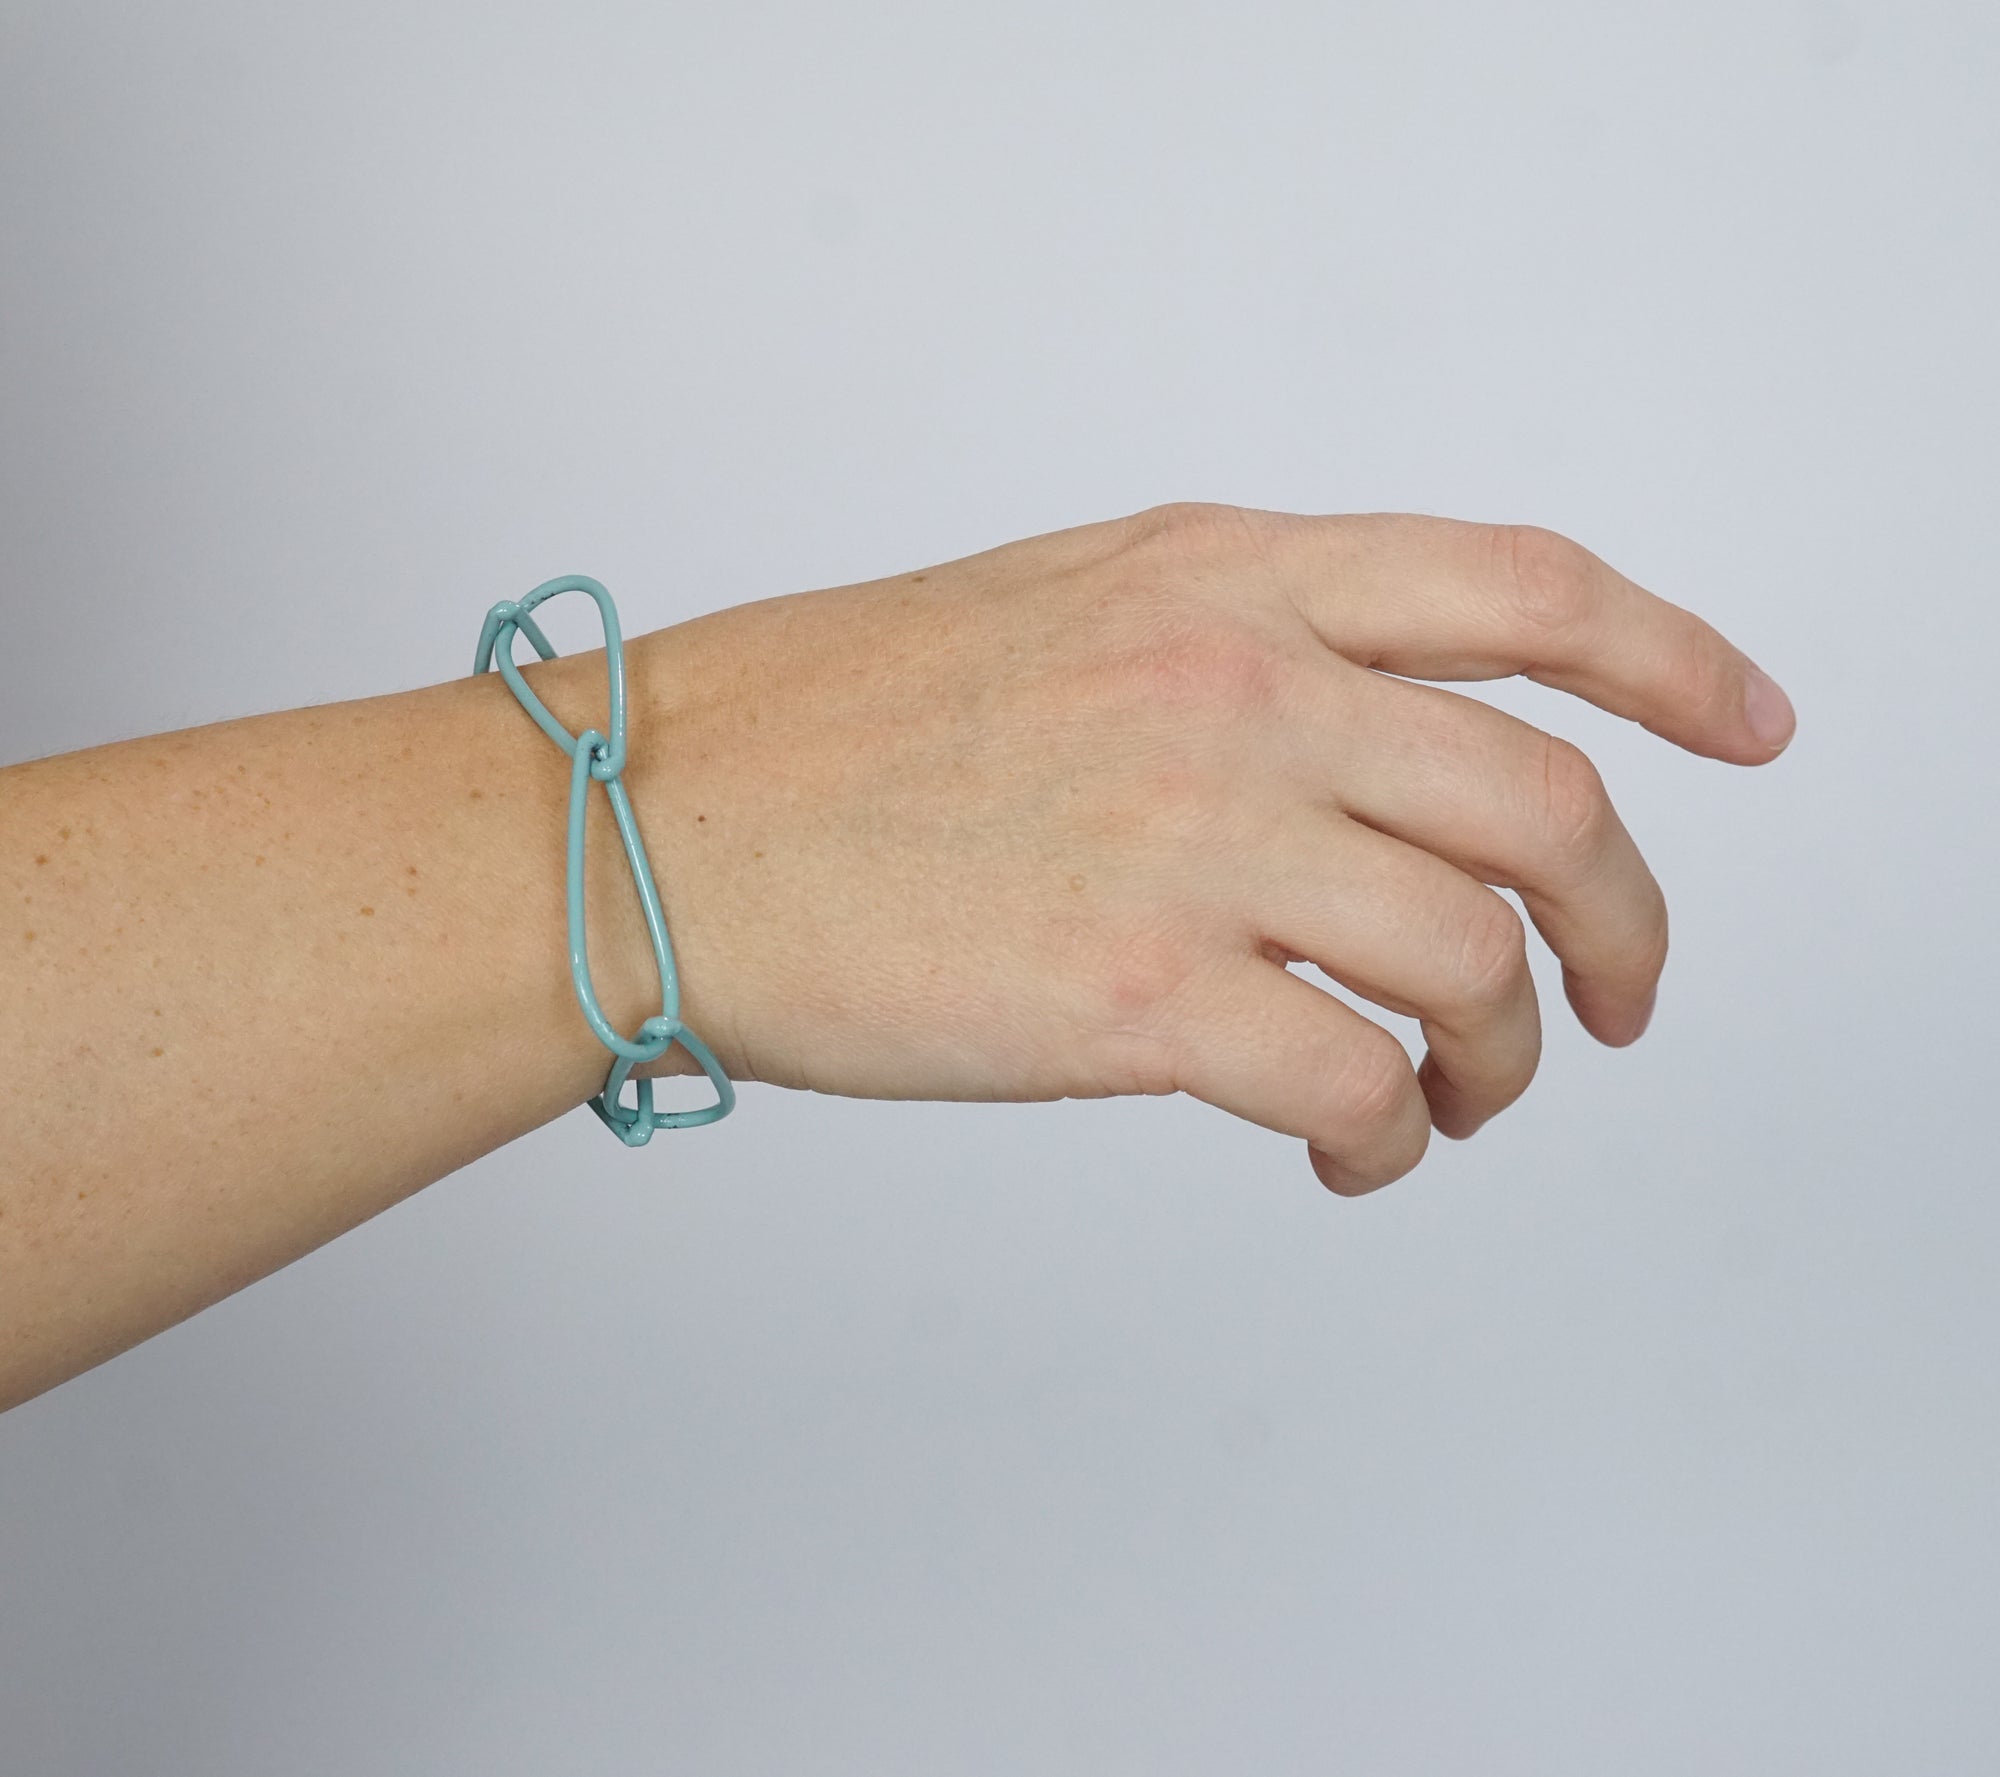 Modular Bracelet in Faded Teal - small